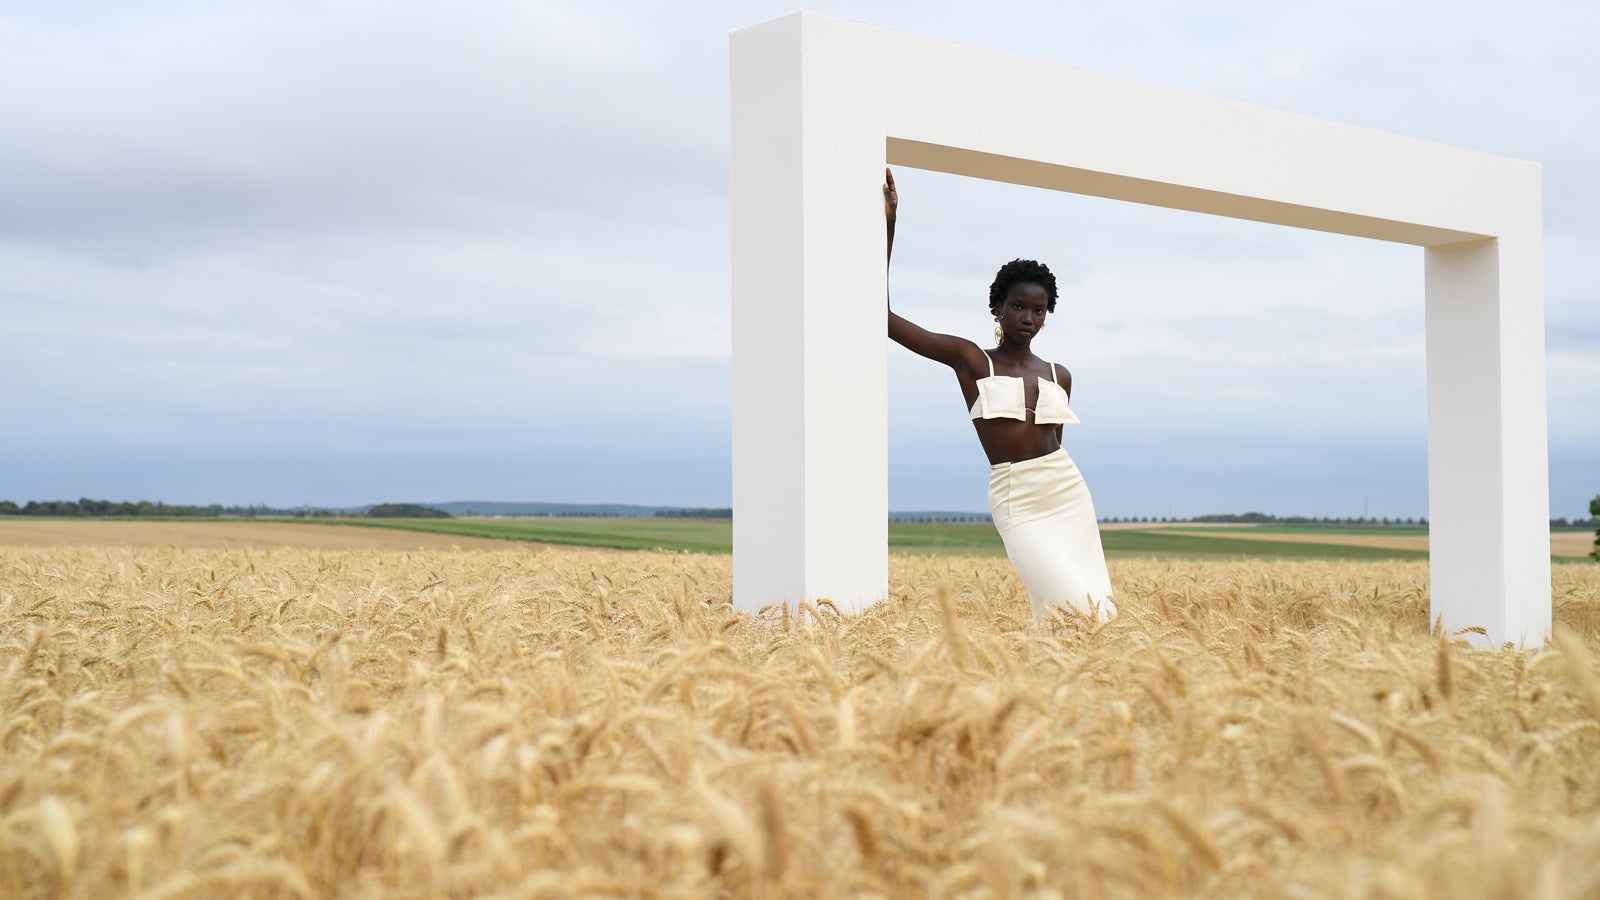 Jacquemus showcases its Spring / Summer 2021 collection in a wheat field, News